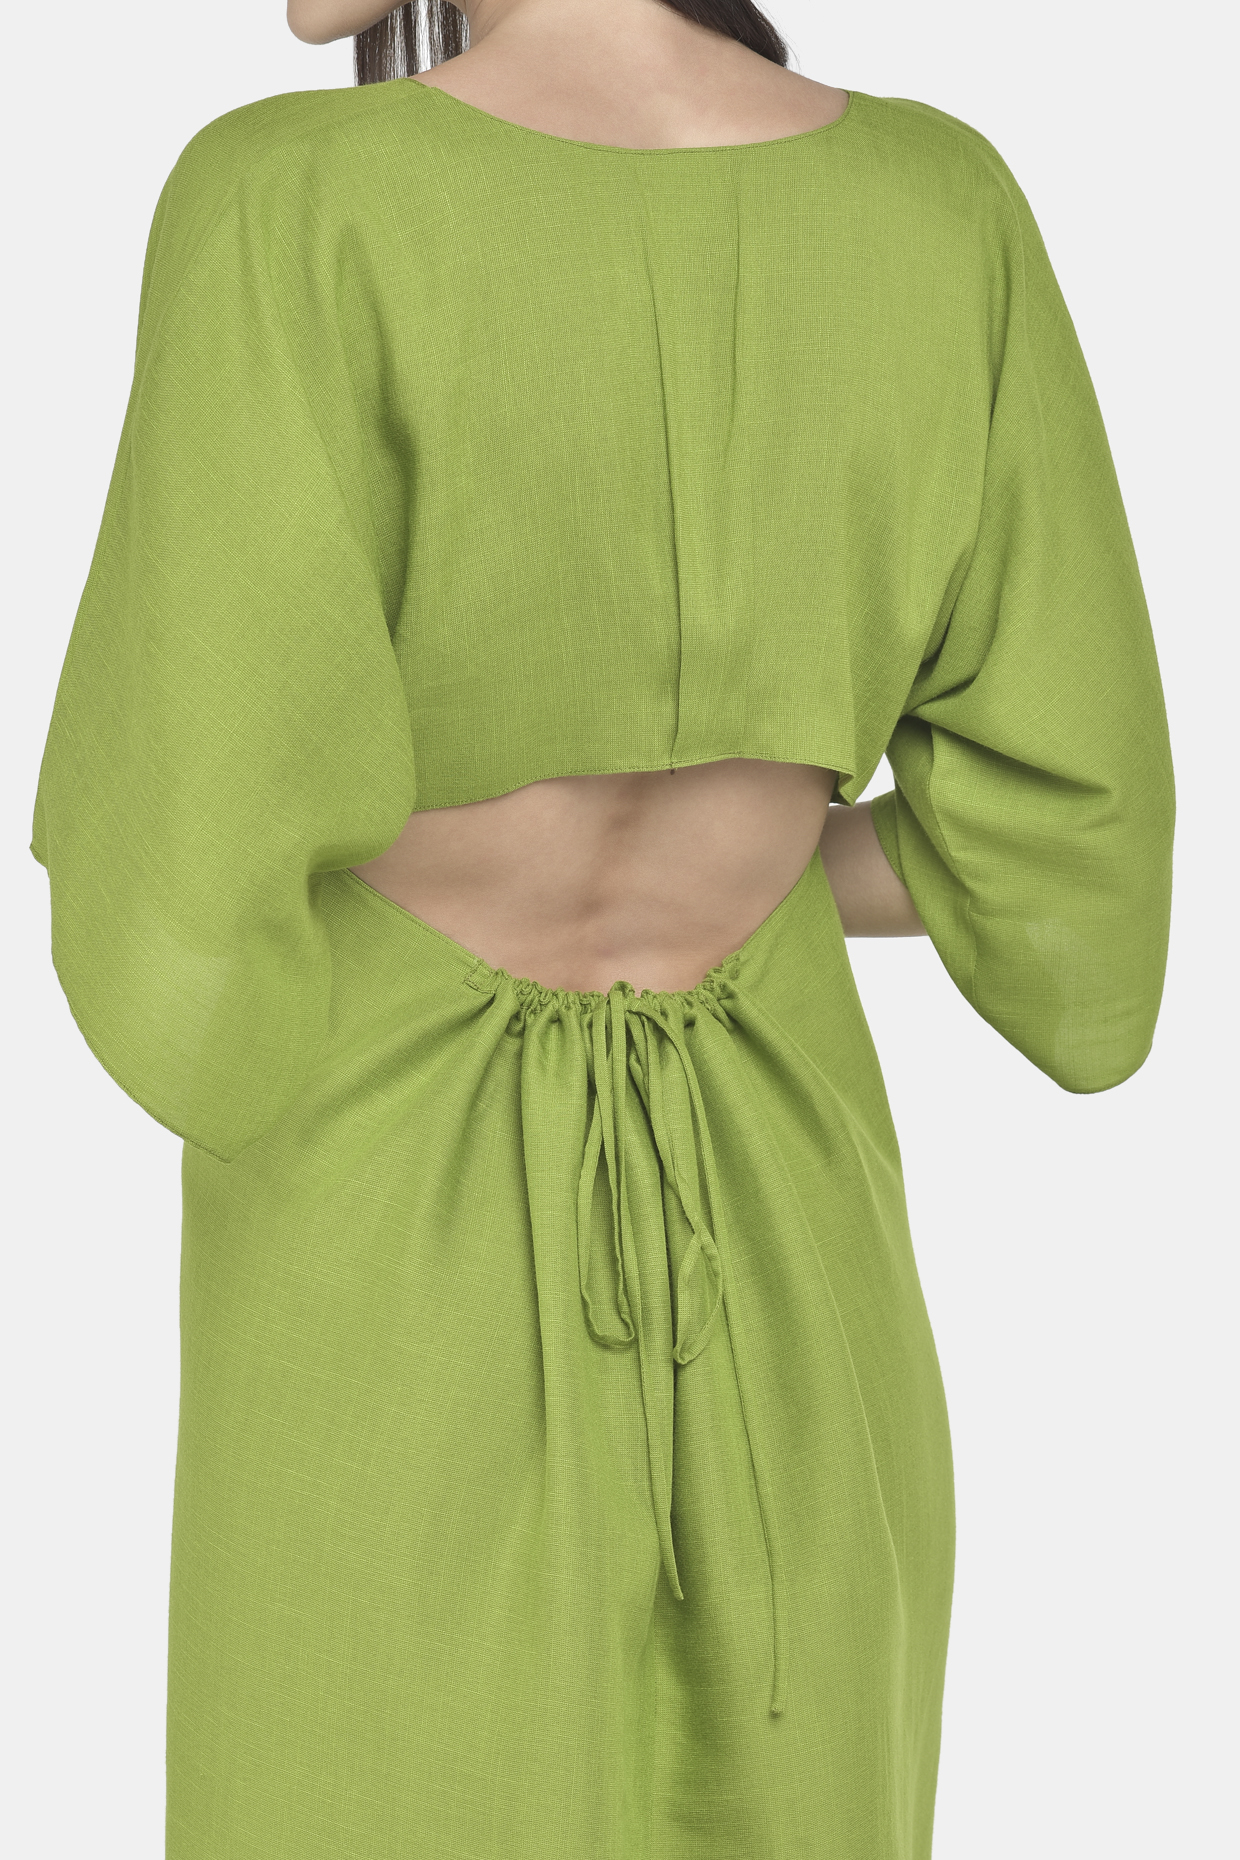 Green Shift Dress With Cut - Out Back